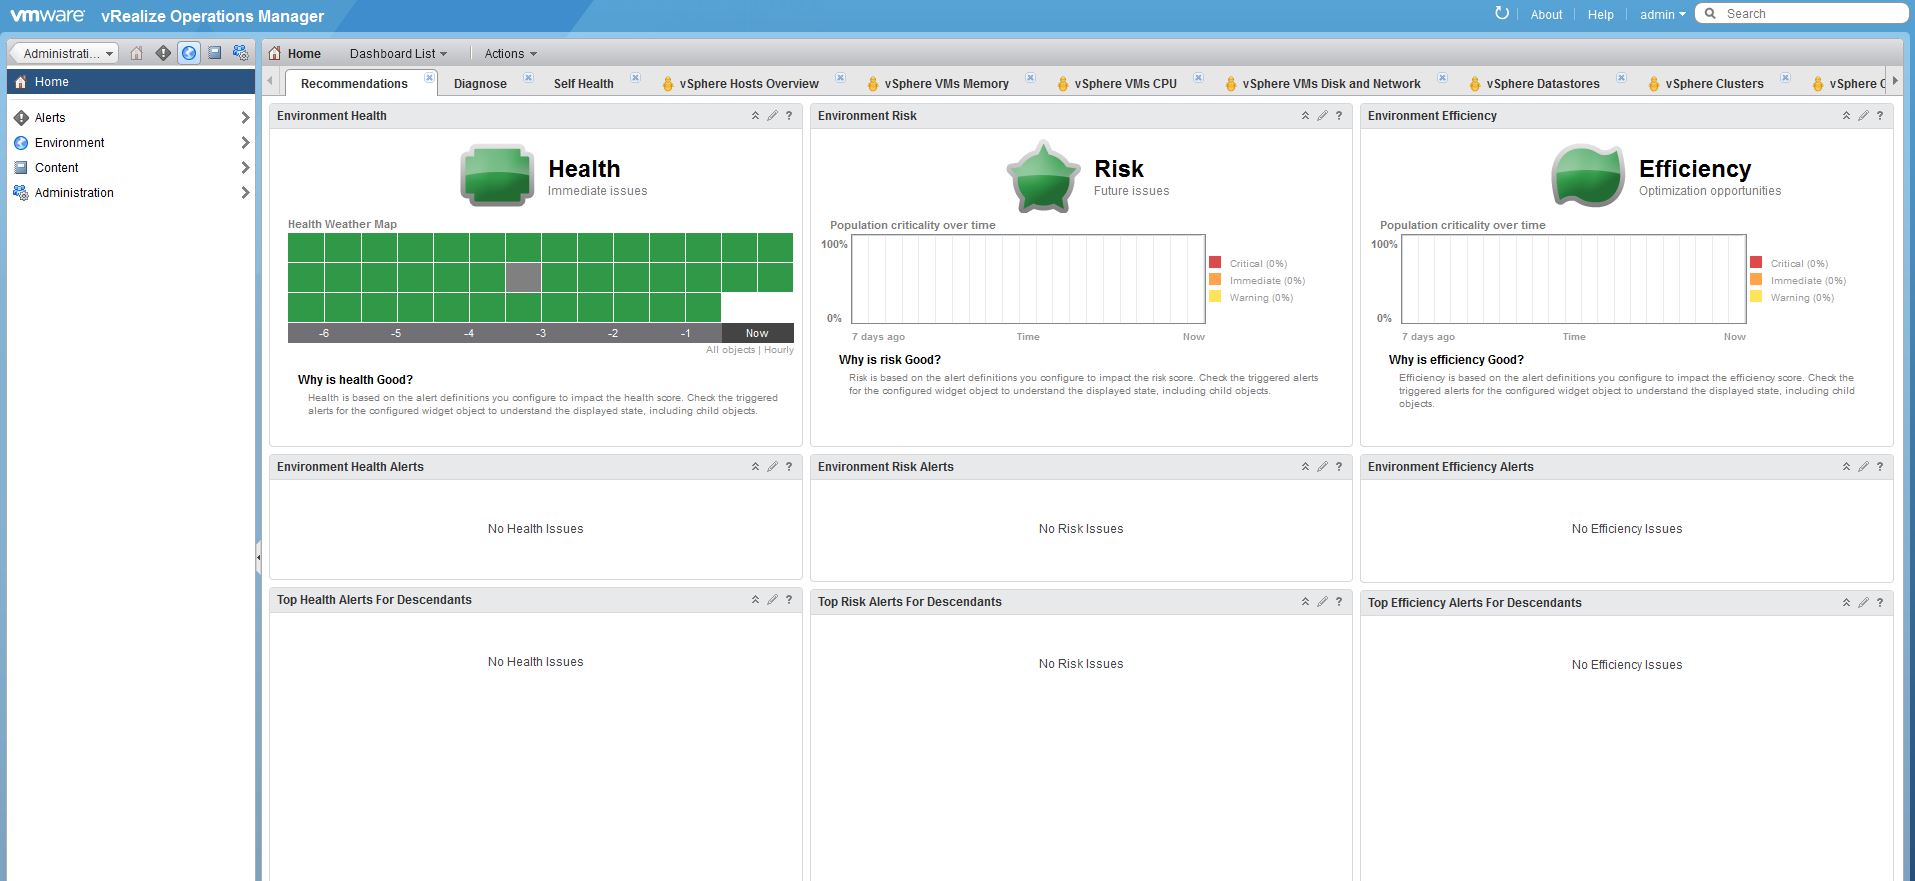 vmware vrealize operations manager 6.1